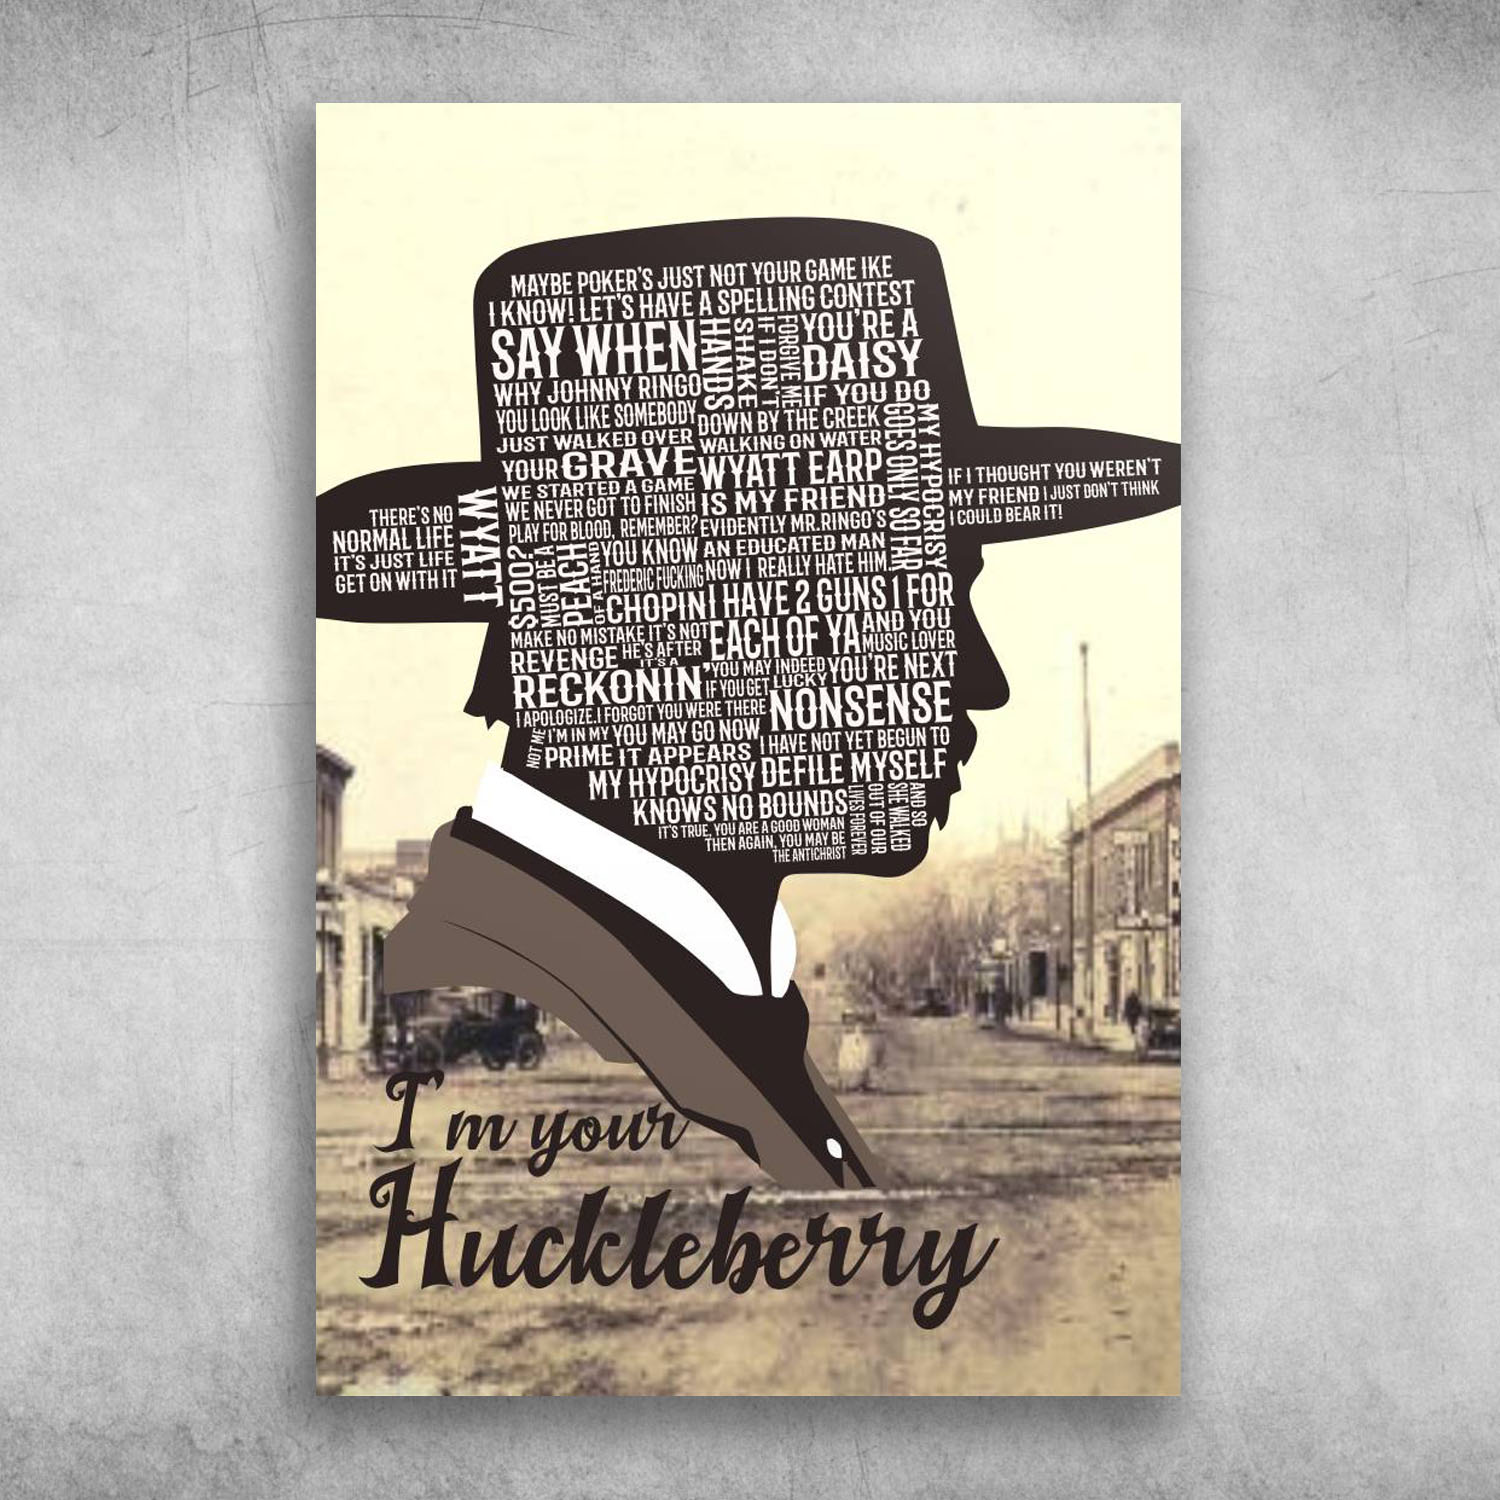 I'm Your Huckleberry Maybe Poker's Just Not Your Game